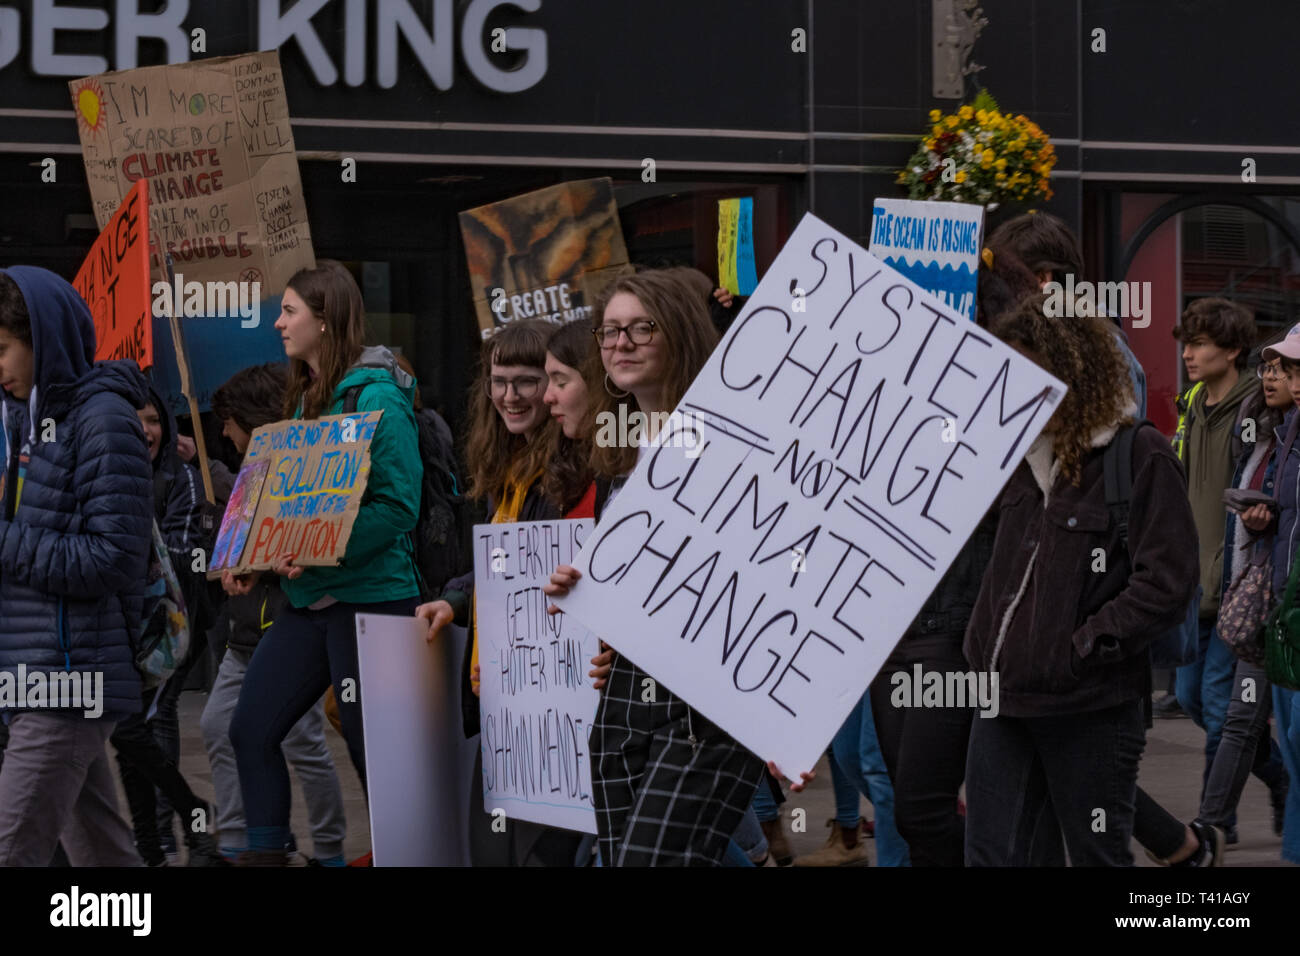 Cardiff Wales UK 04/12/2019 Children, young adults and adults march down St. John Street and through Cardiff centre, protesting to the government. Stock Photo